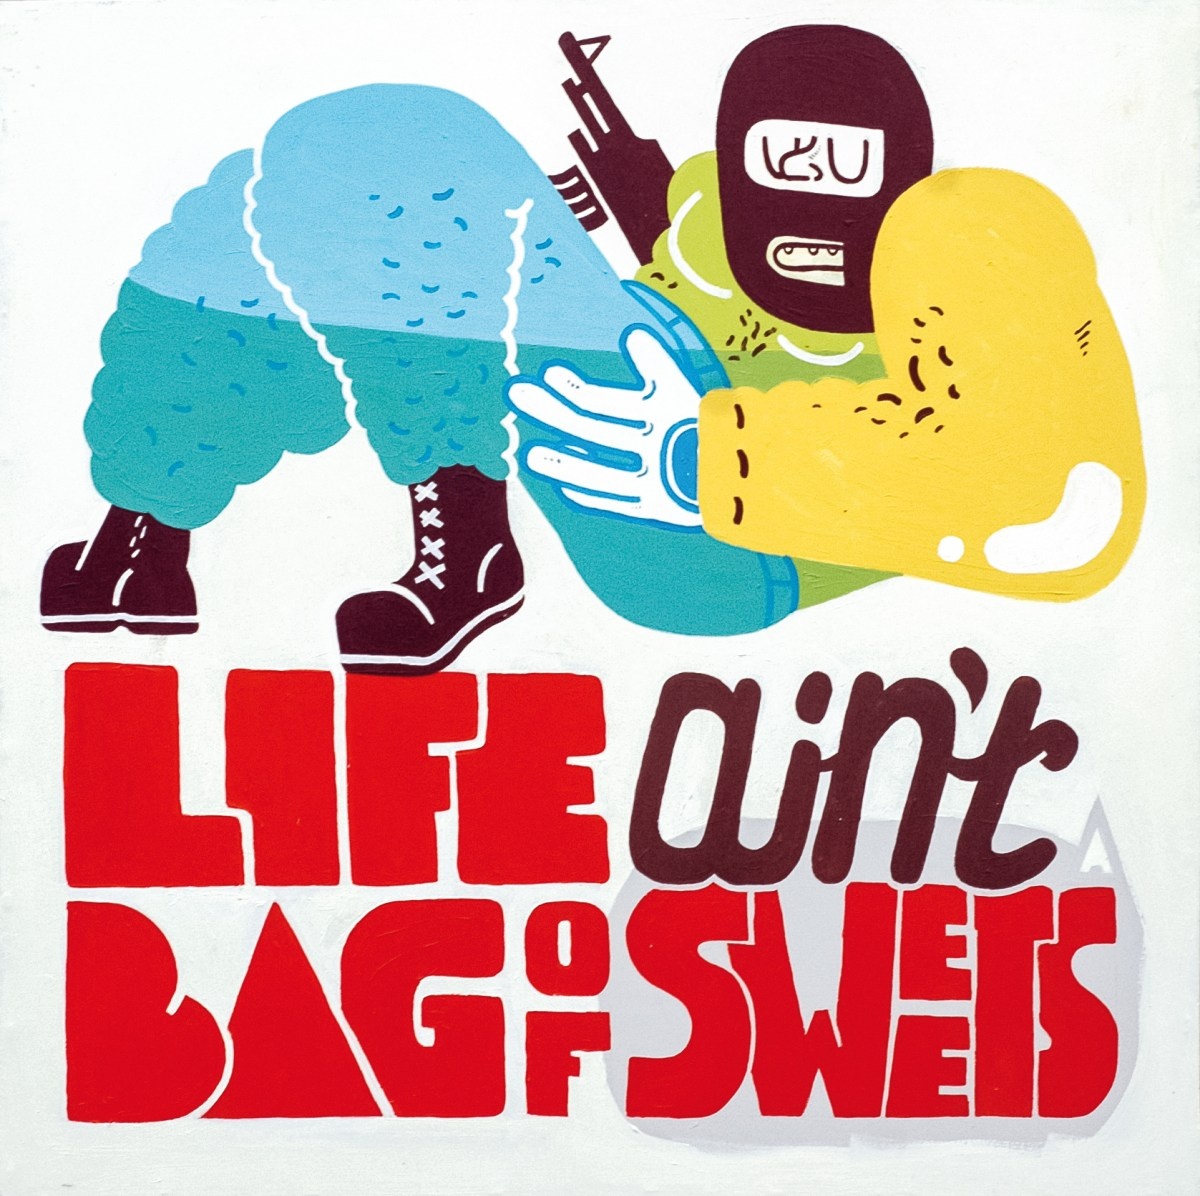 Life ain't a bag of sweets